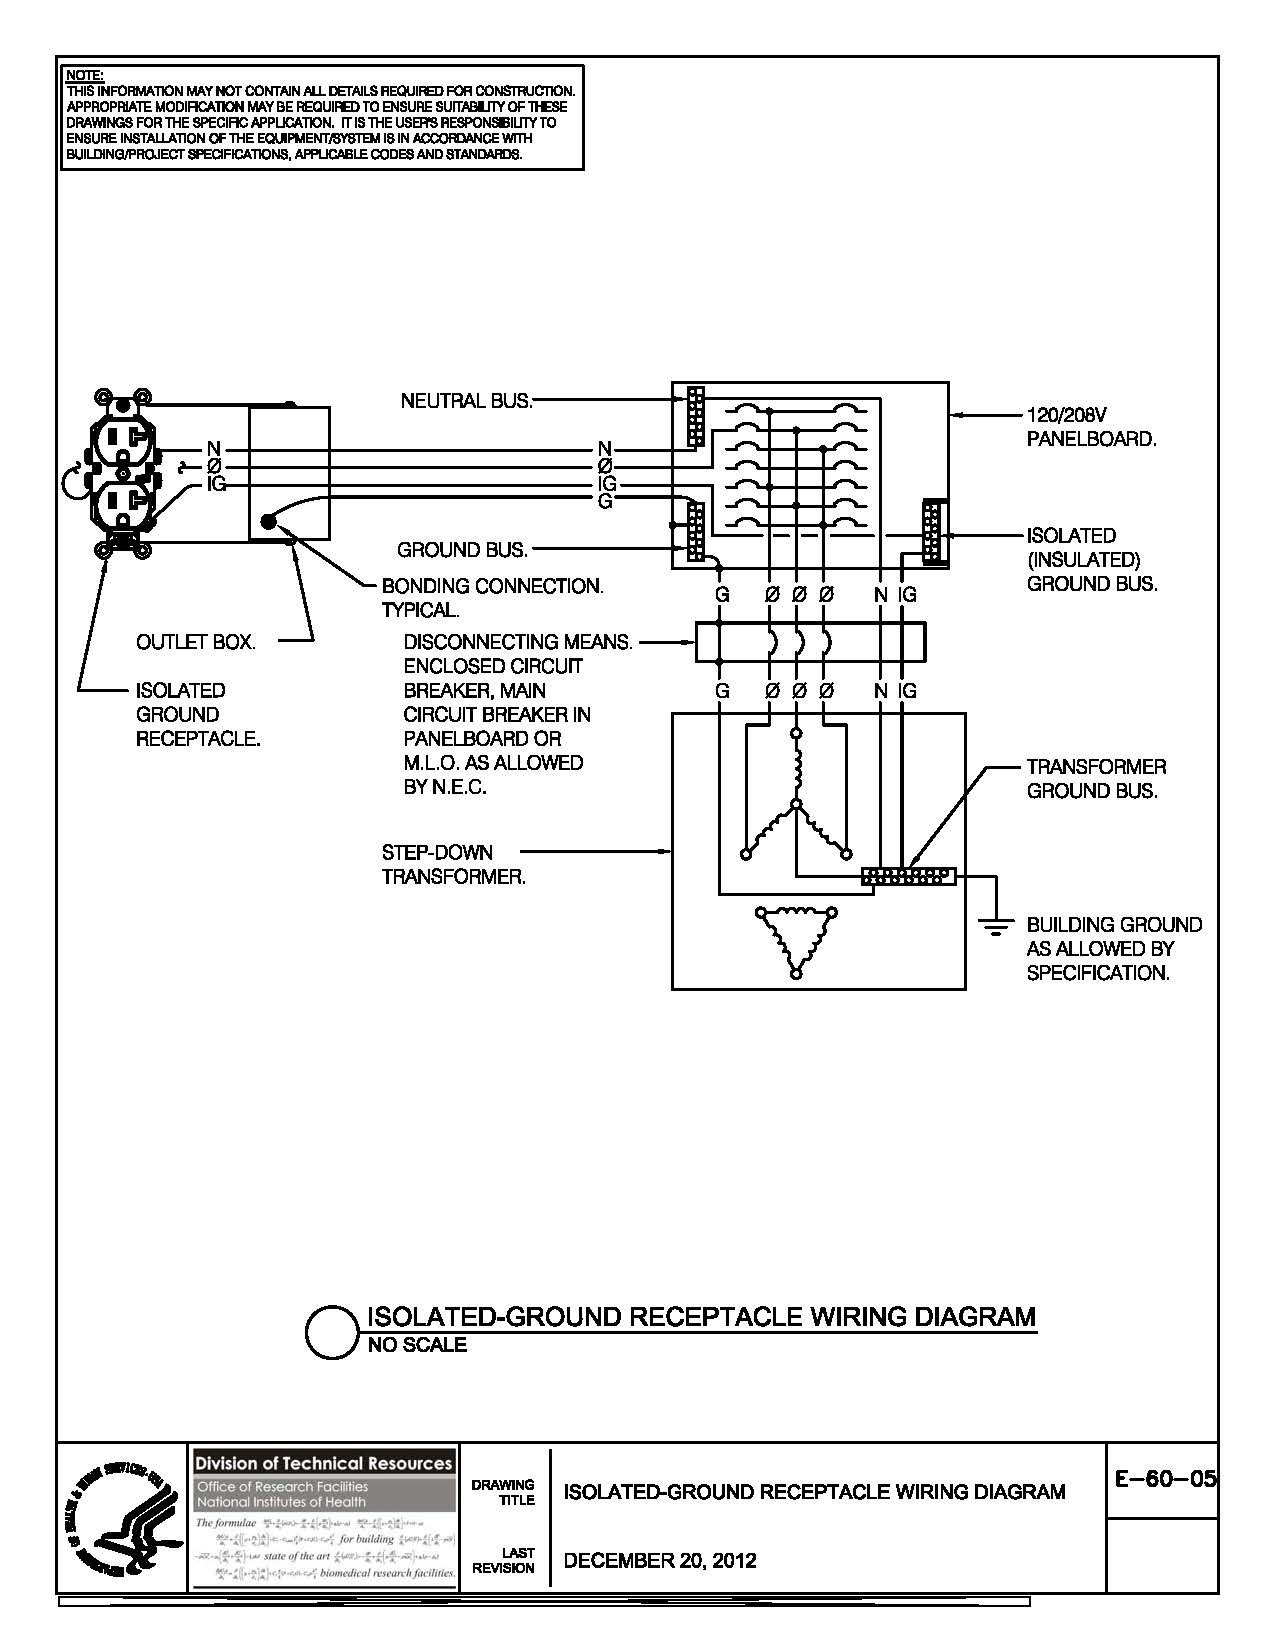 Wiring Diagram Receptacle Copy isolated Ground Receptacle Wiring Diagram Diagrams Database